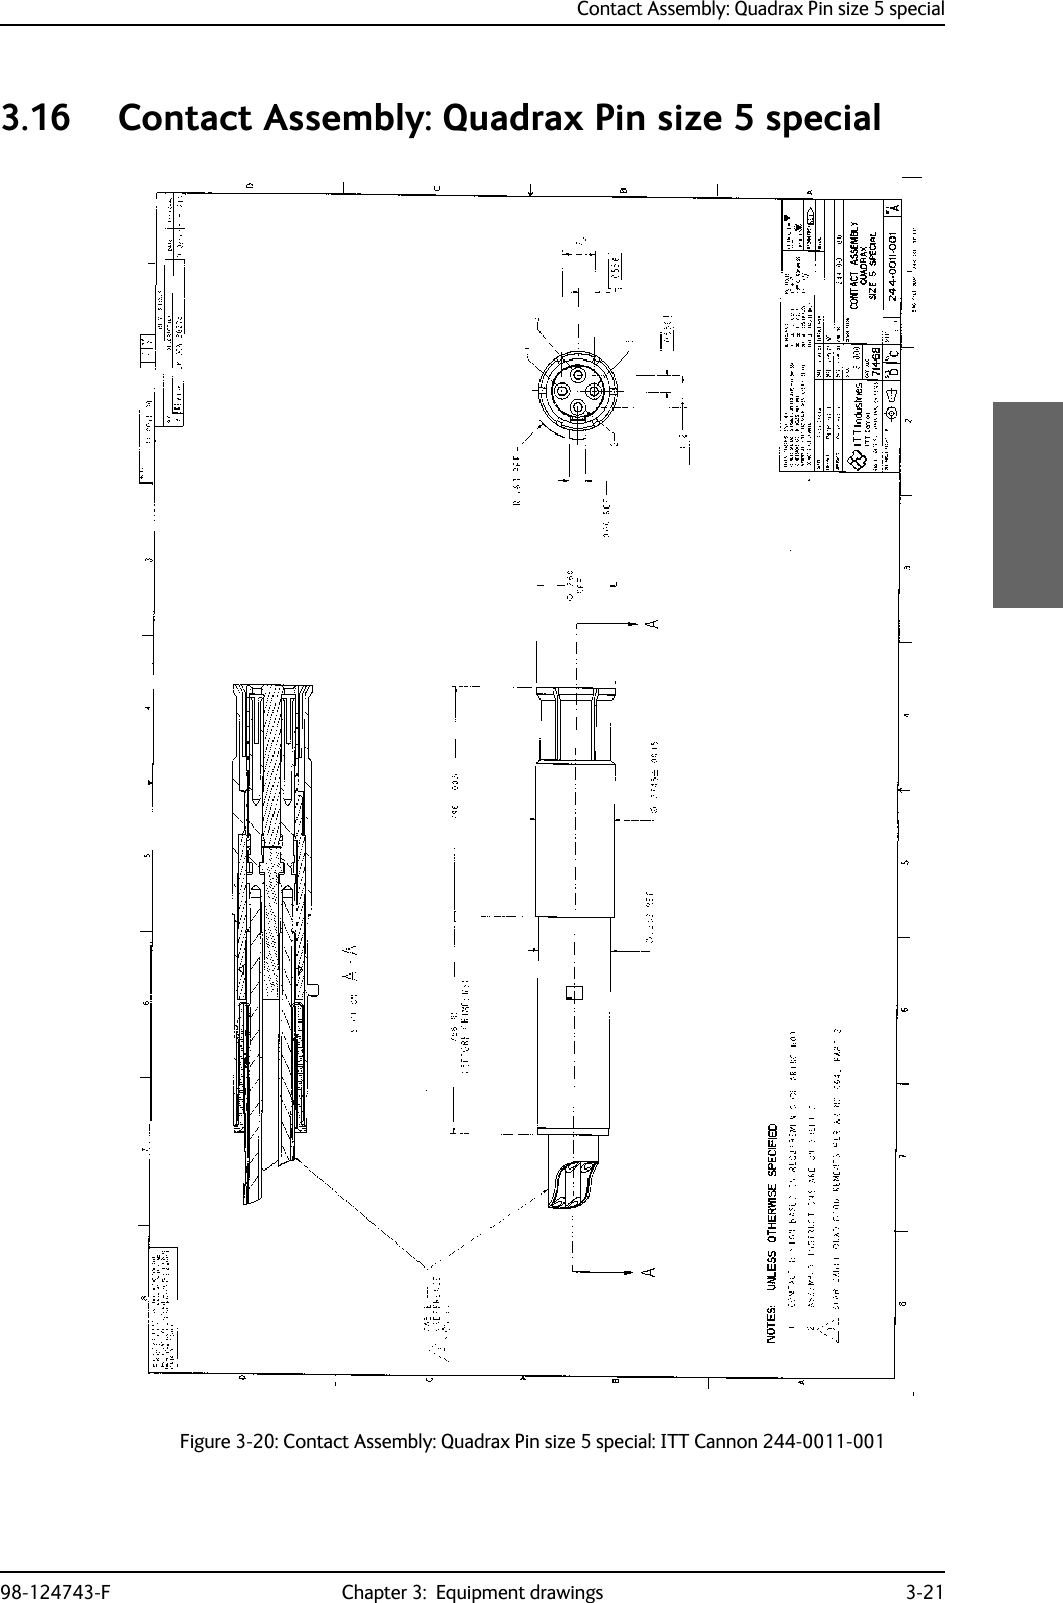 Contact Assembly: Quadrax Pin size 5 special98-124743-F Chapter 3:  Equipment drawings 3-213.16 Contact Assembly: Quadrax Pin size 5 specialFigure 3-20: Contact Assembly: Quadrax Pin size 5 special: ITT Cannon 244-0011-001 